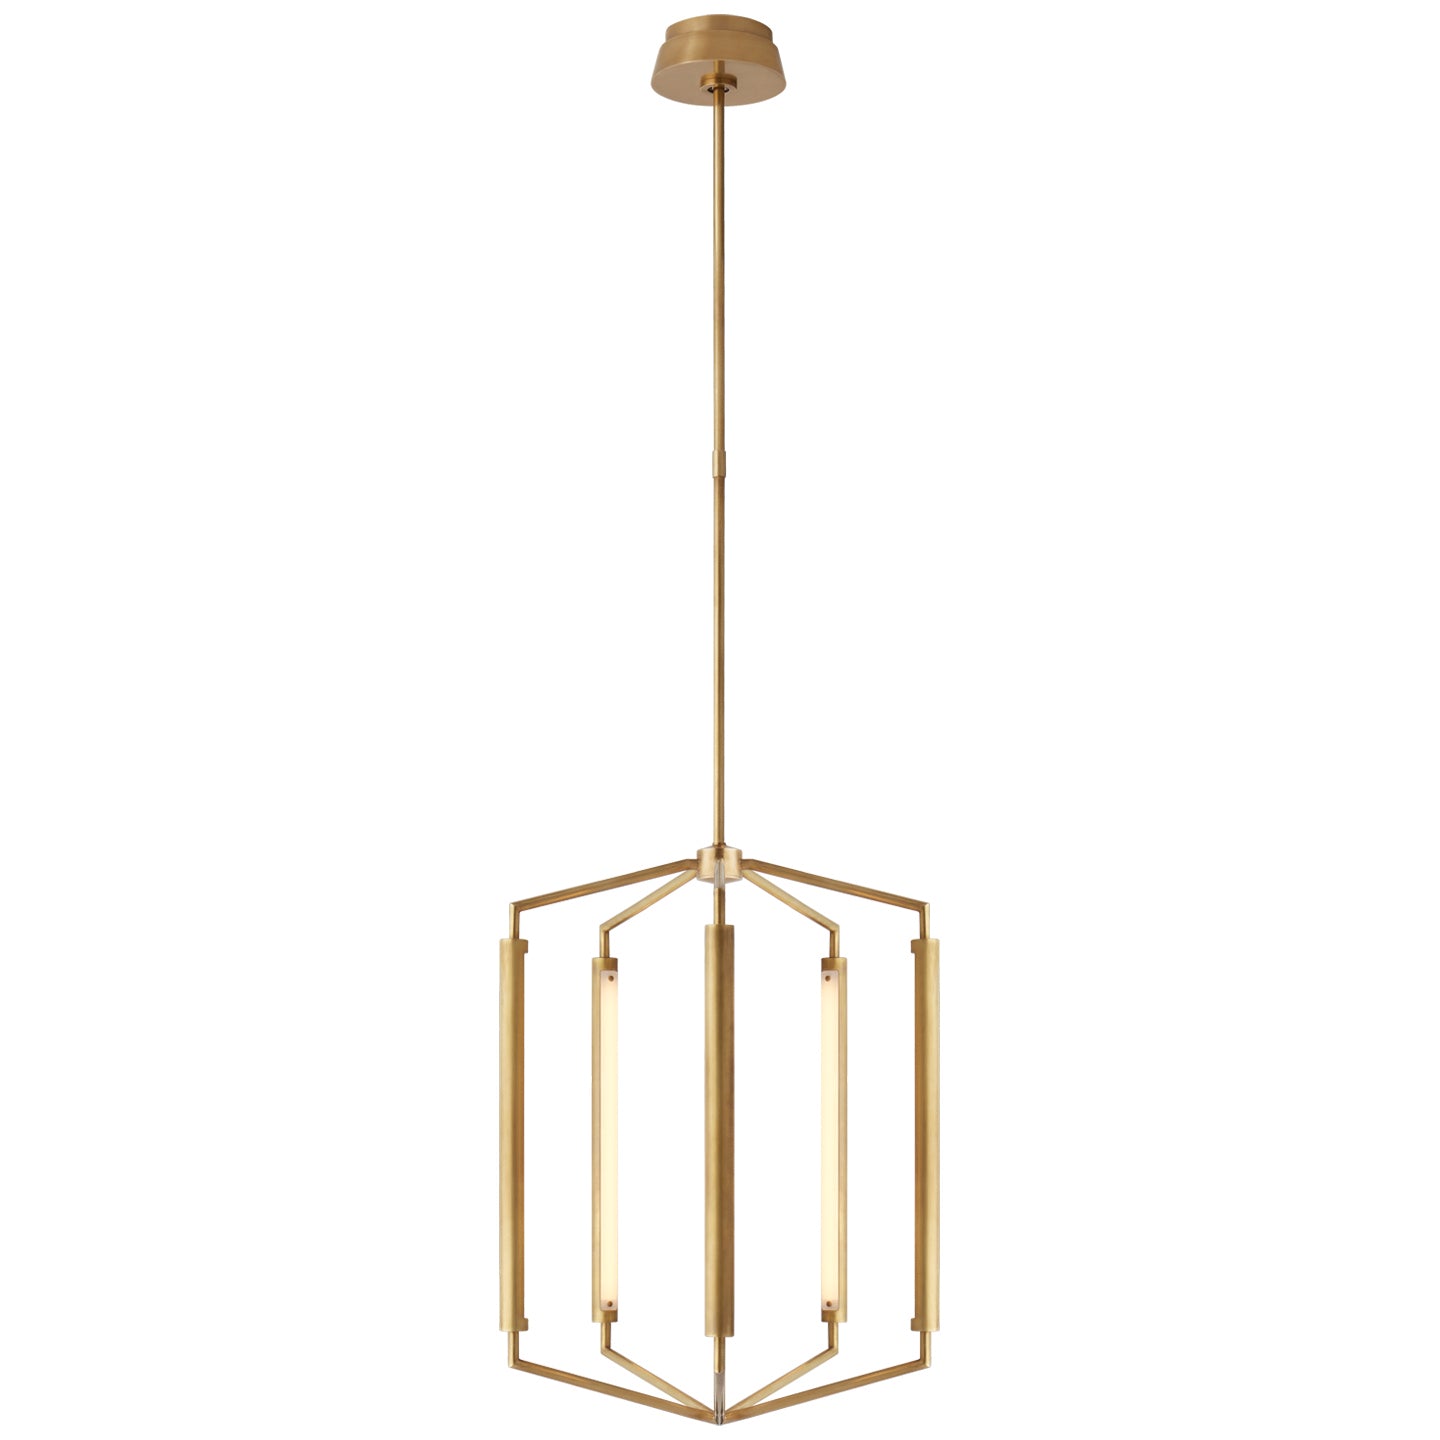 Load image into Gallery viewer, Visual Comfort Signature - KW 5703AB - LED Lantern - Appareil - Antique-Burnished Brass
